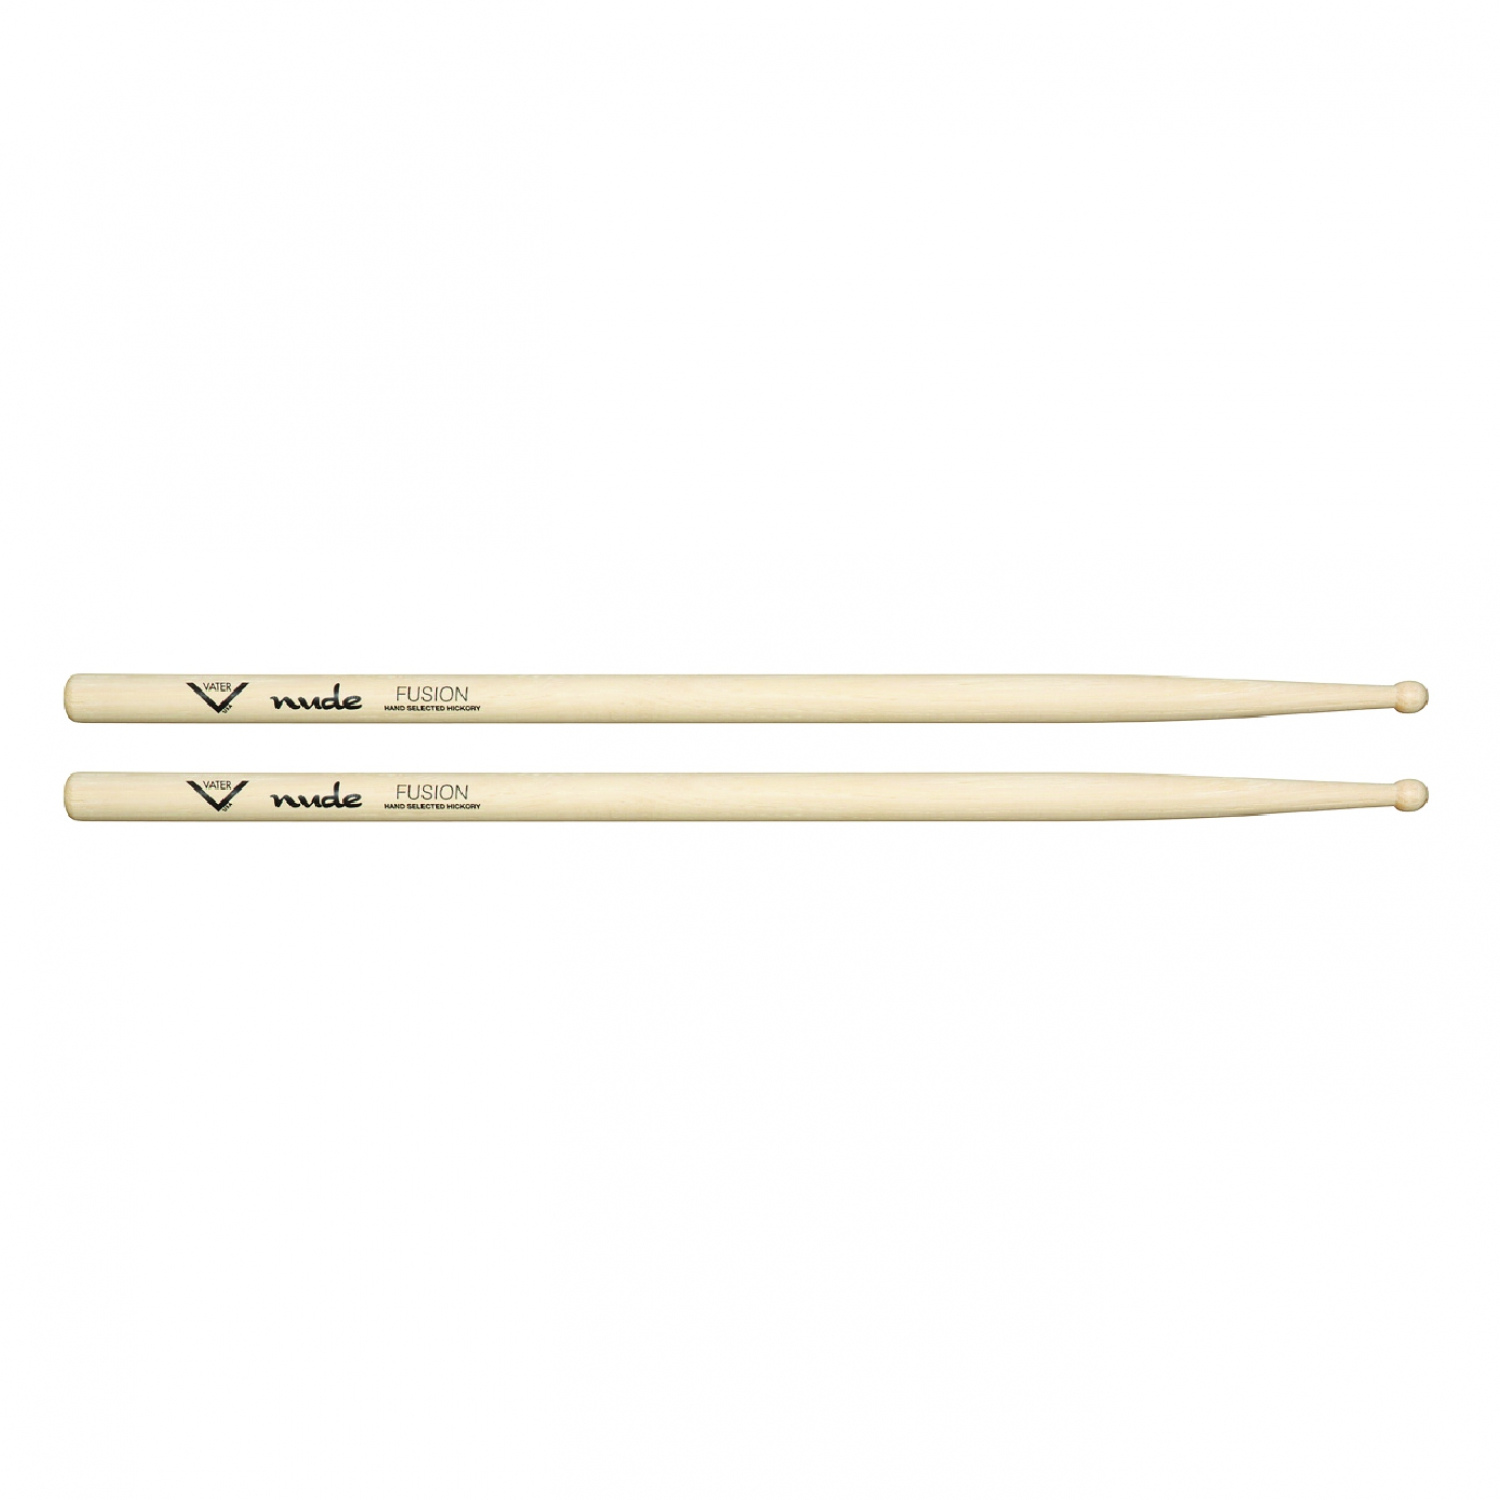 Vater VHNFW Nude Fusion Wood